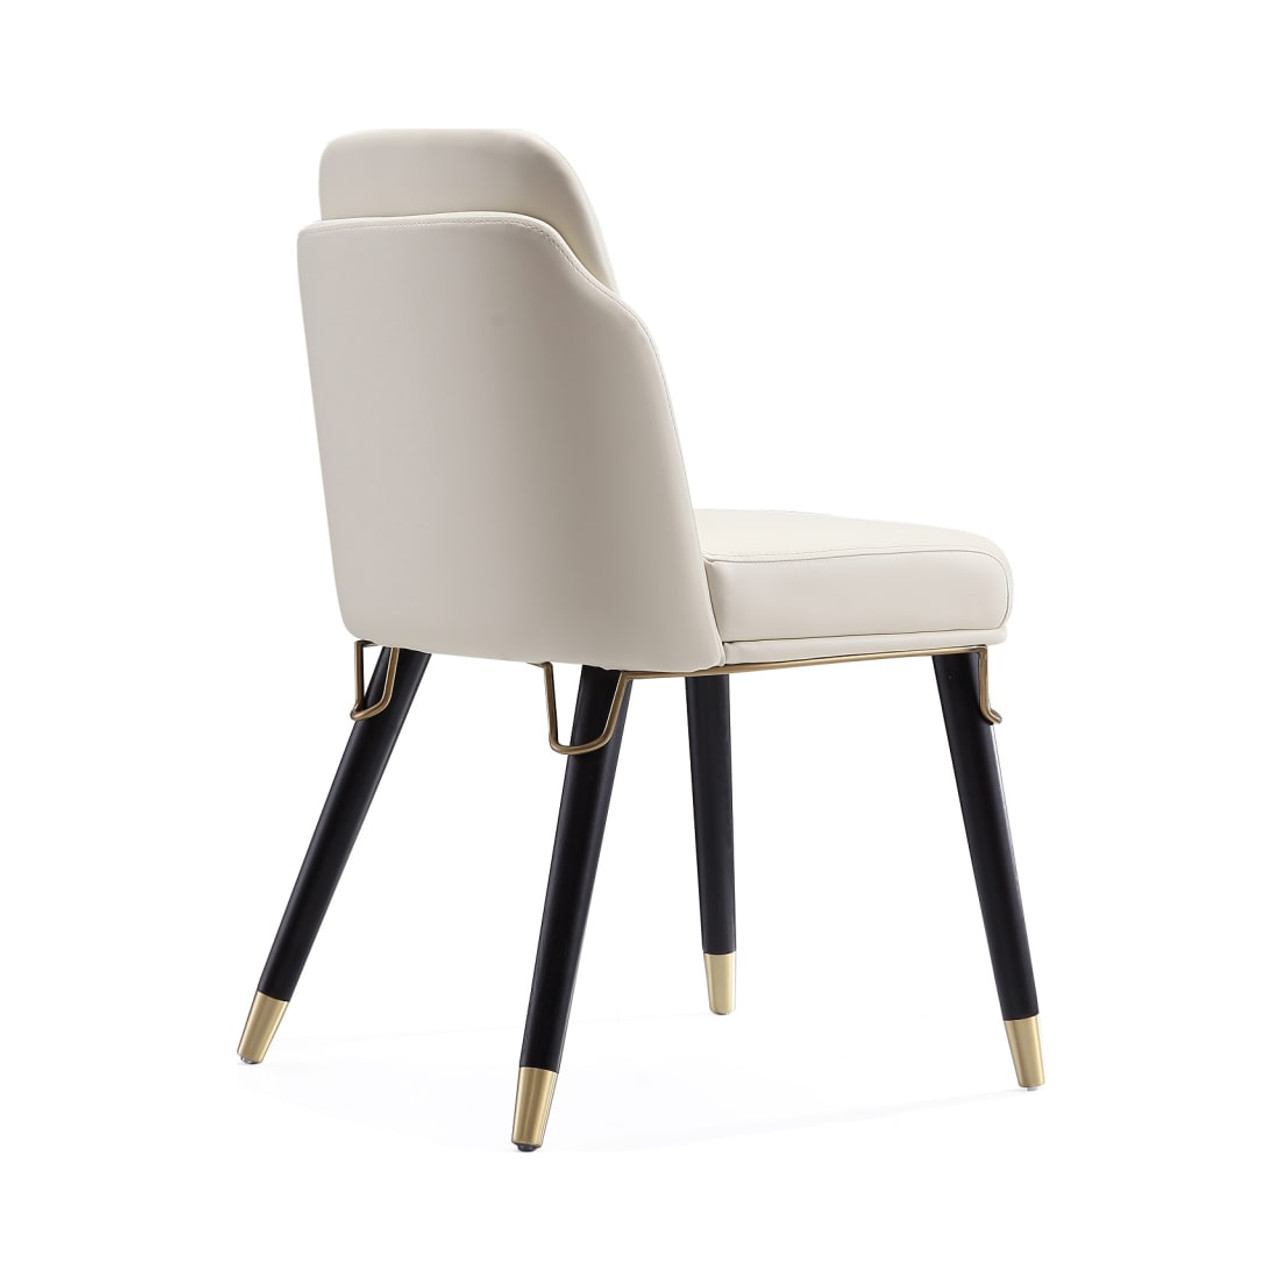 Estelle Dining Chair in Cream and Black (Set of 2)